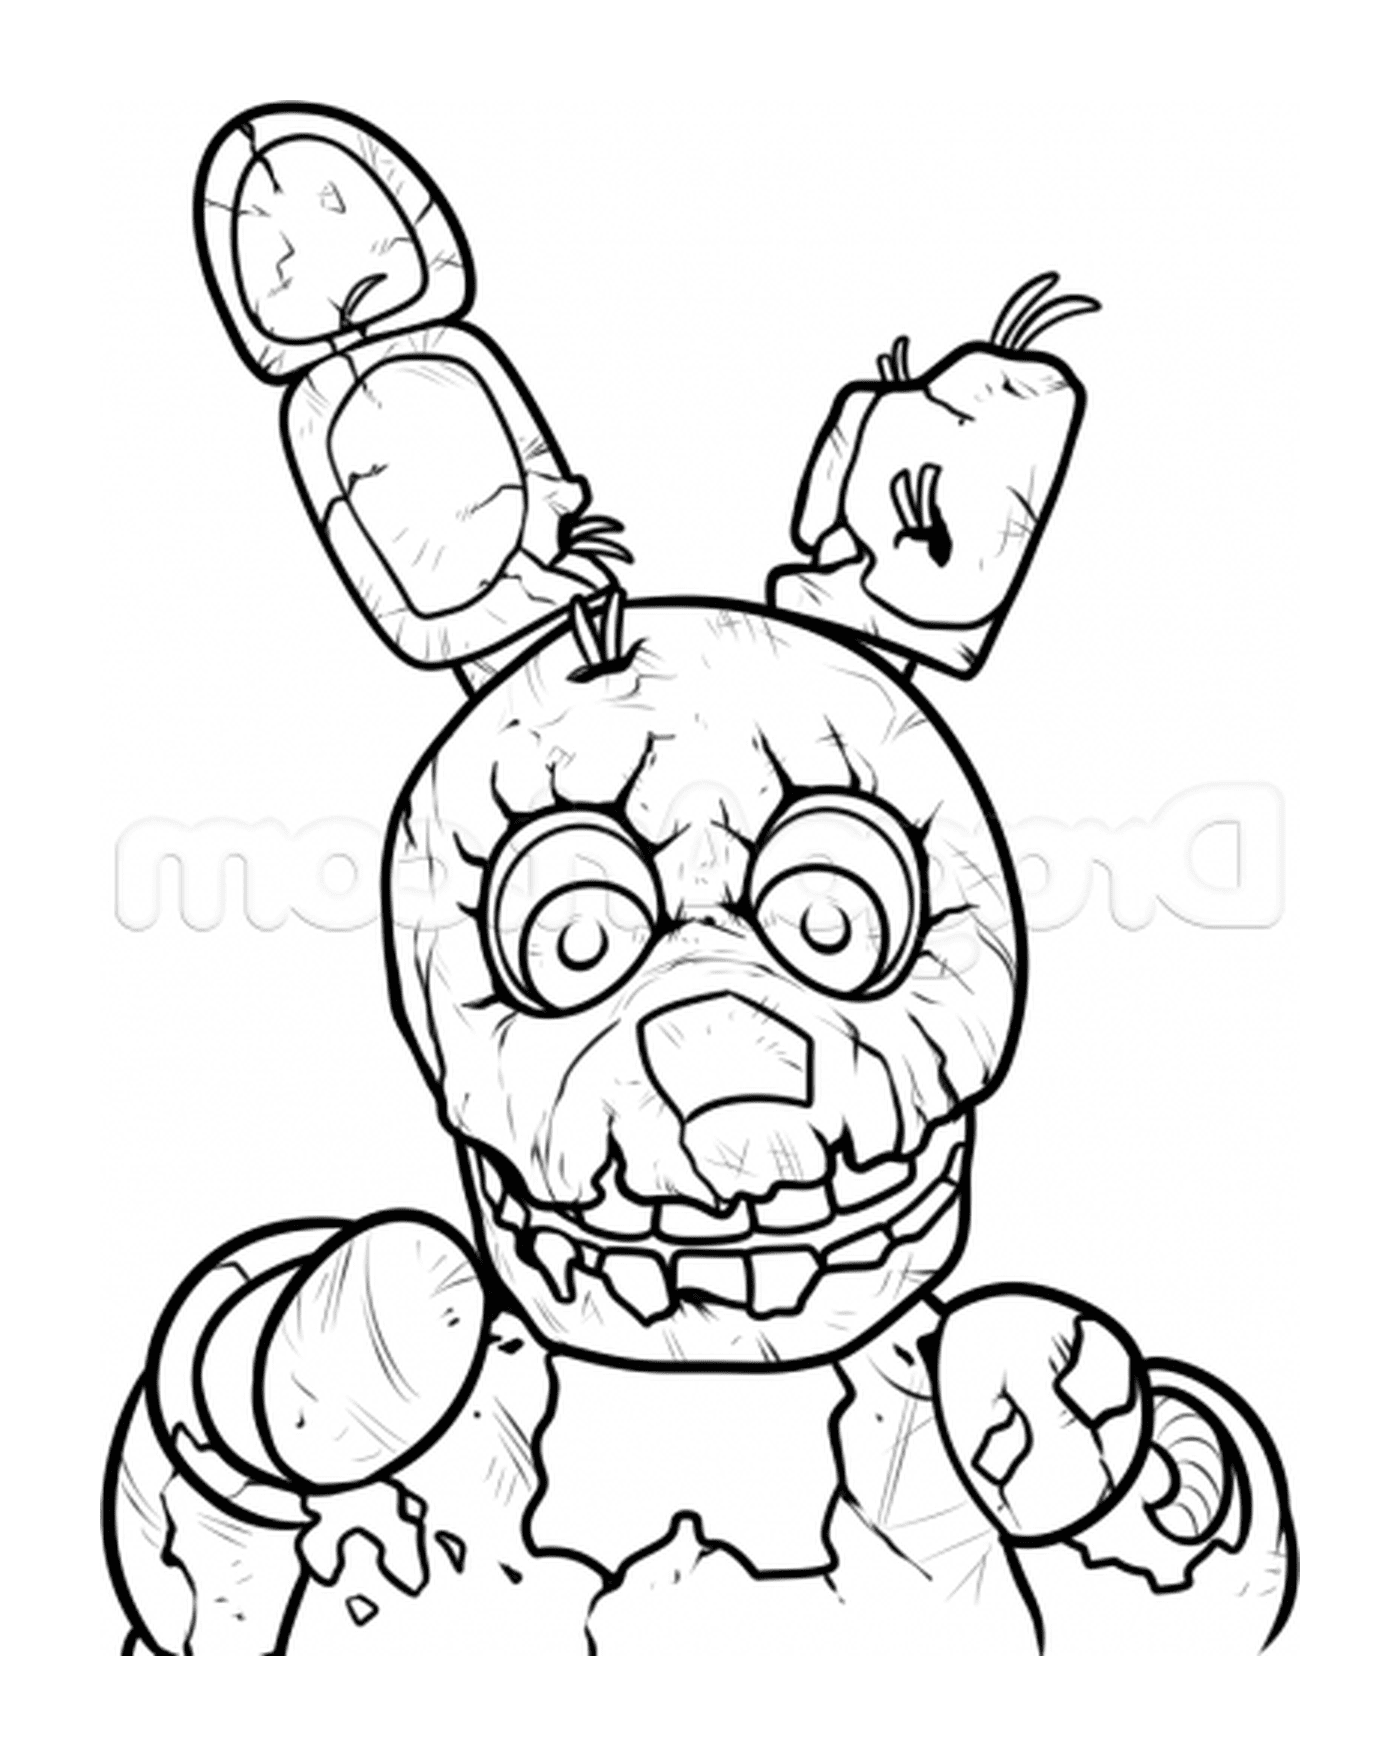  How to draw Toy Bonnie from Five Nights at Freddy's 